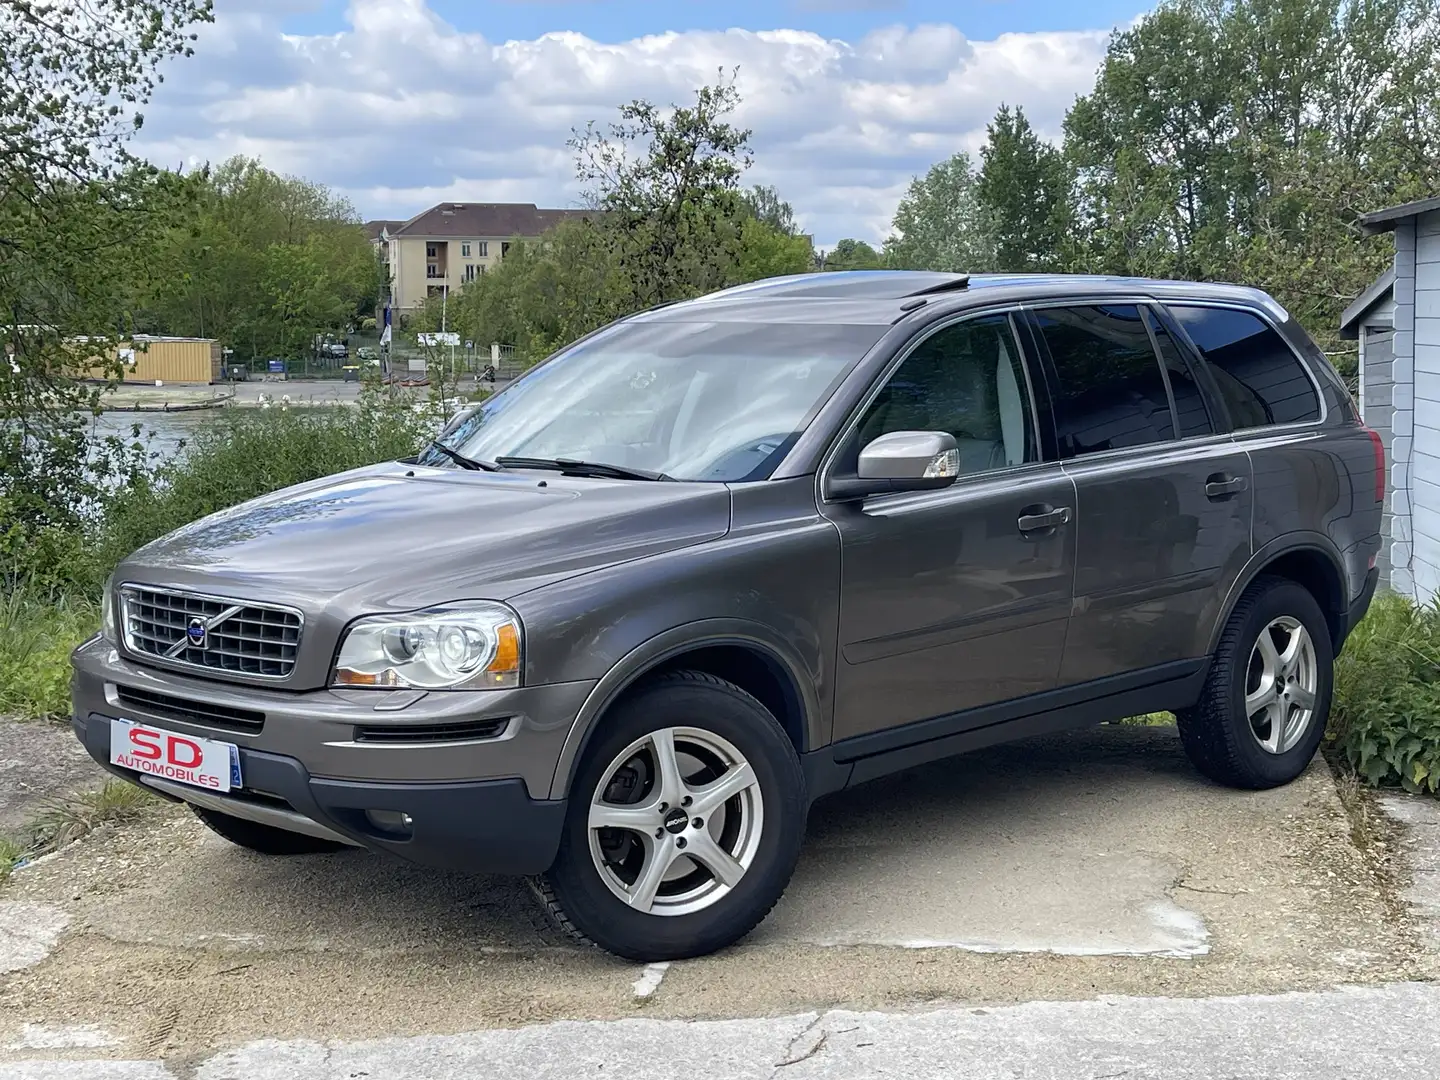 Volvo XC90 D5 185ch FAP Xenium Geartronic 7 places Maro - 1